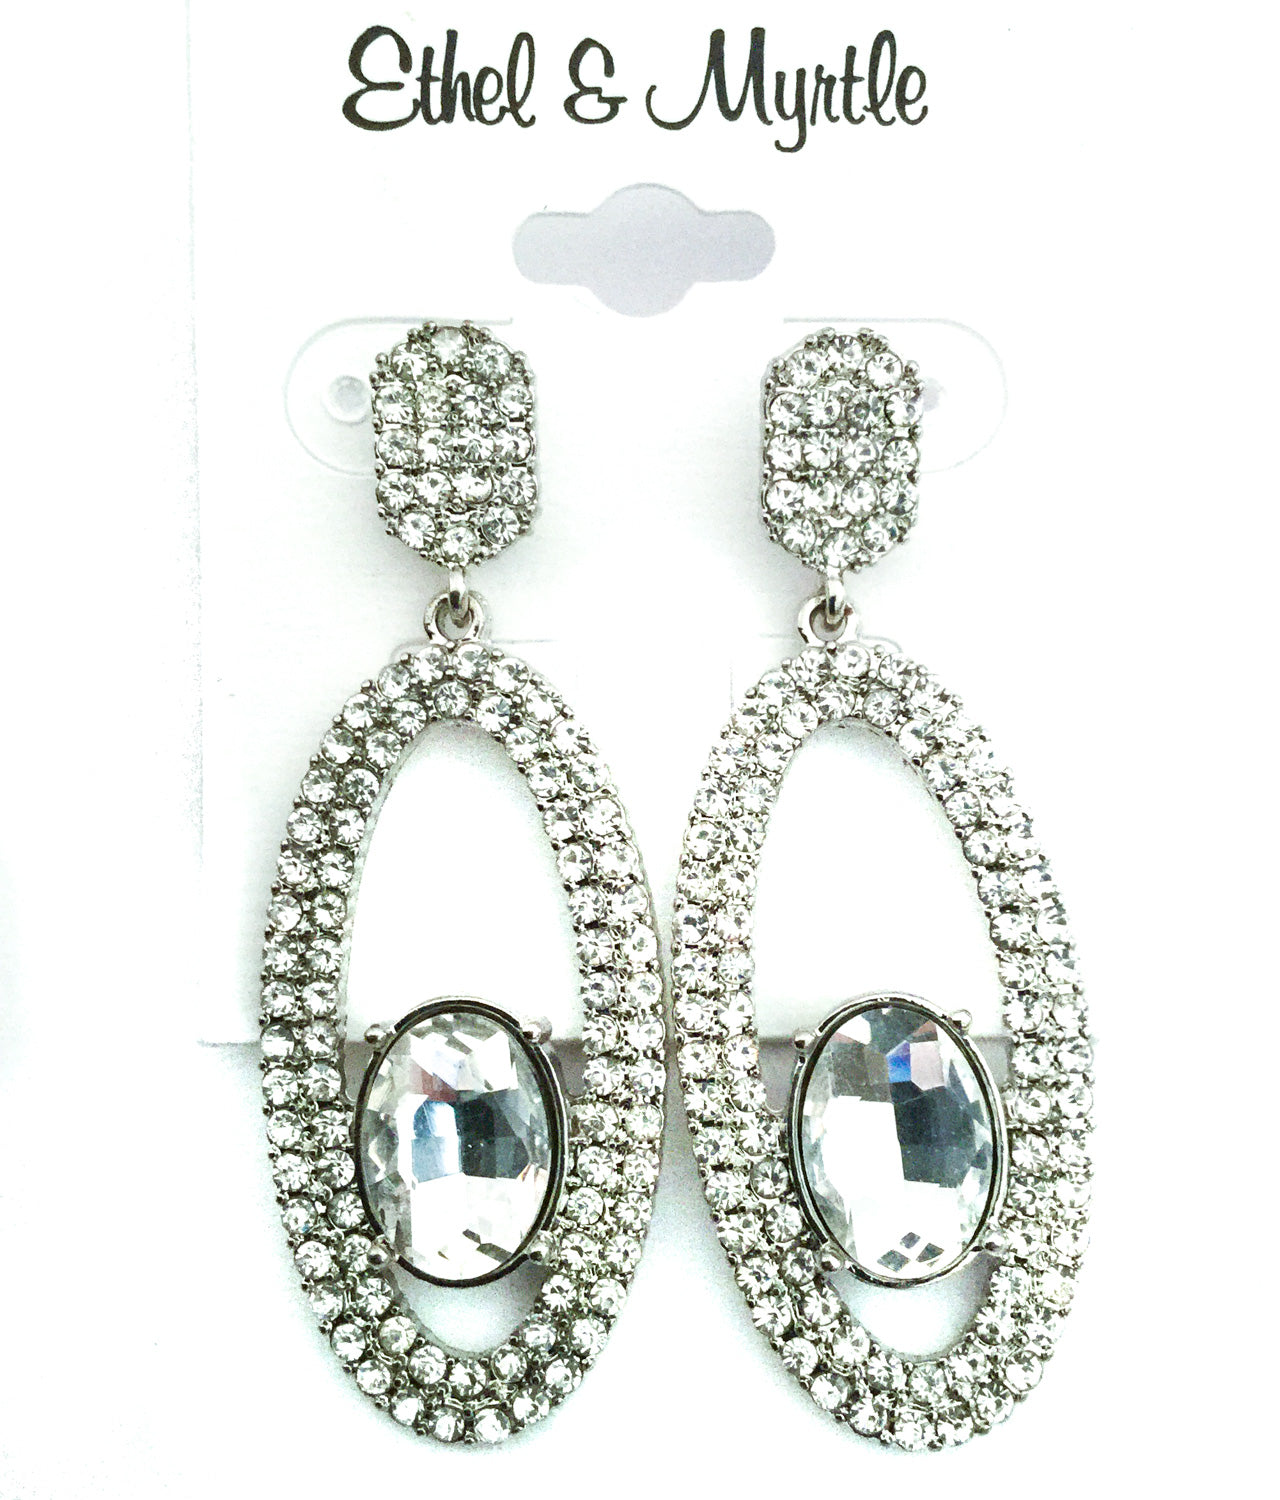 Crystal Fashion Earrings - Willow Tree and Company